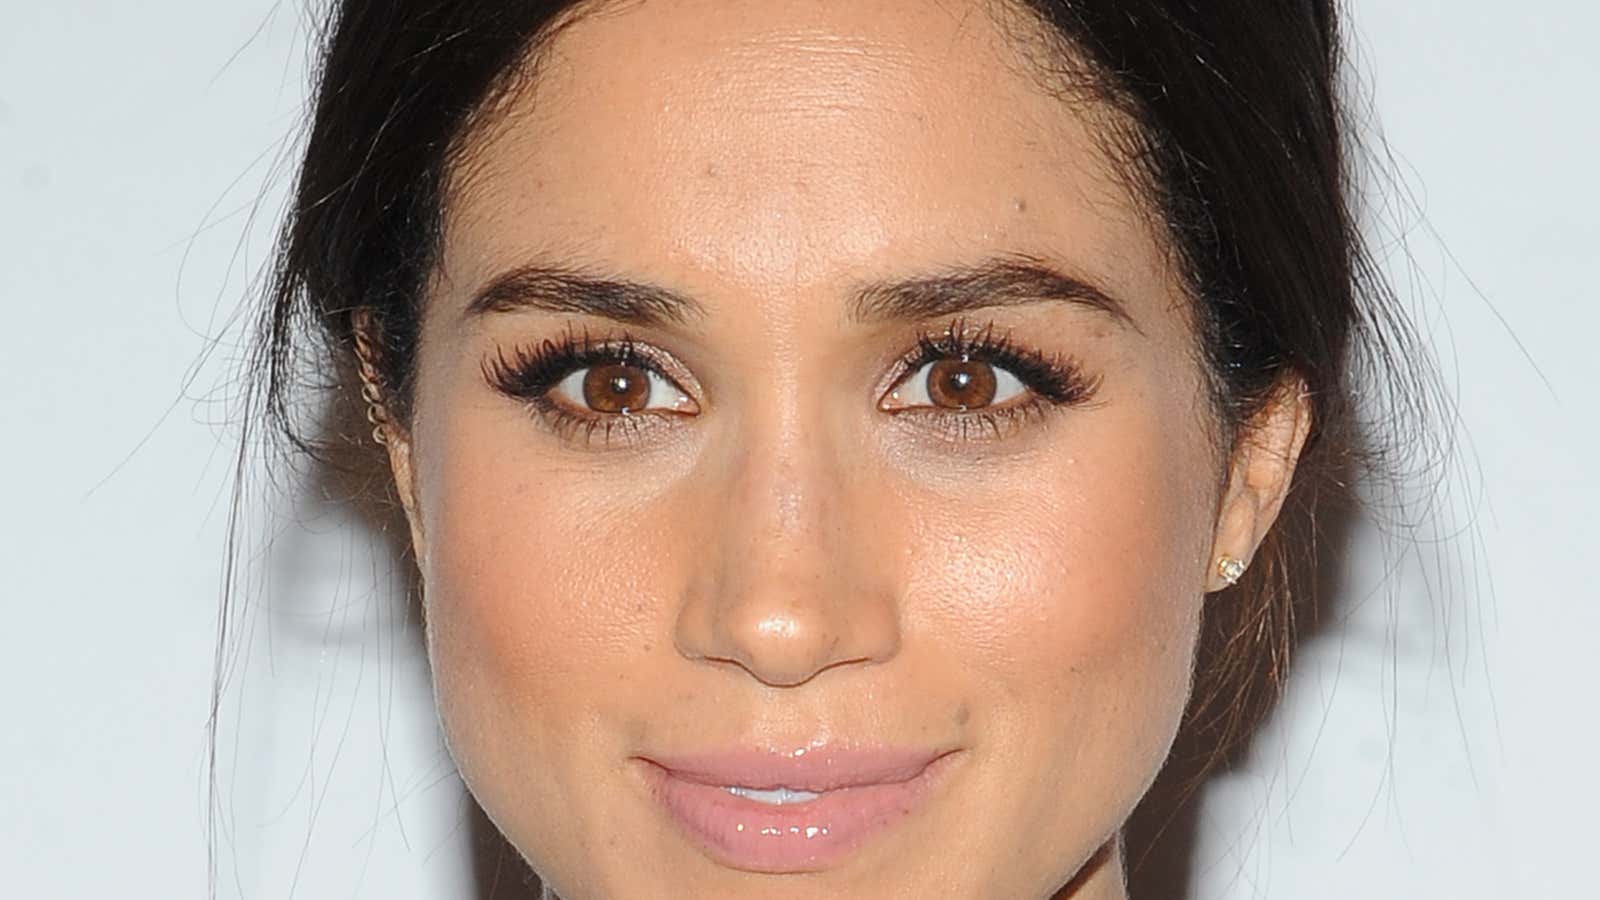 Meghan Markle Eyelashes: How to Get Her Gorgeous Look